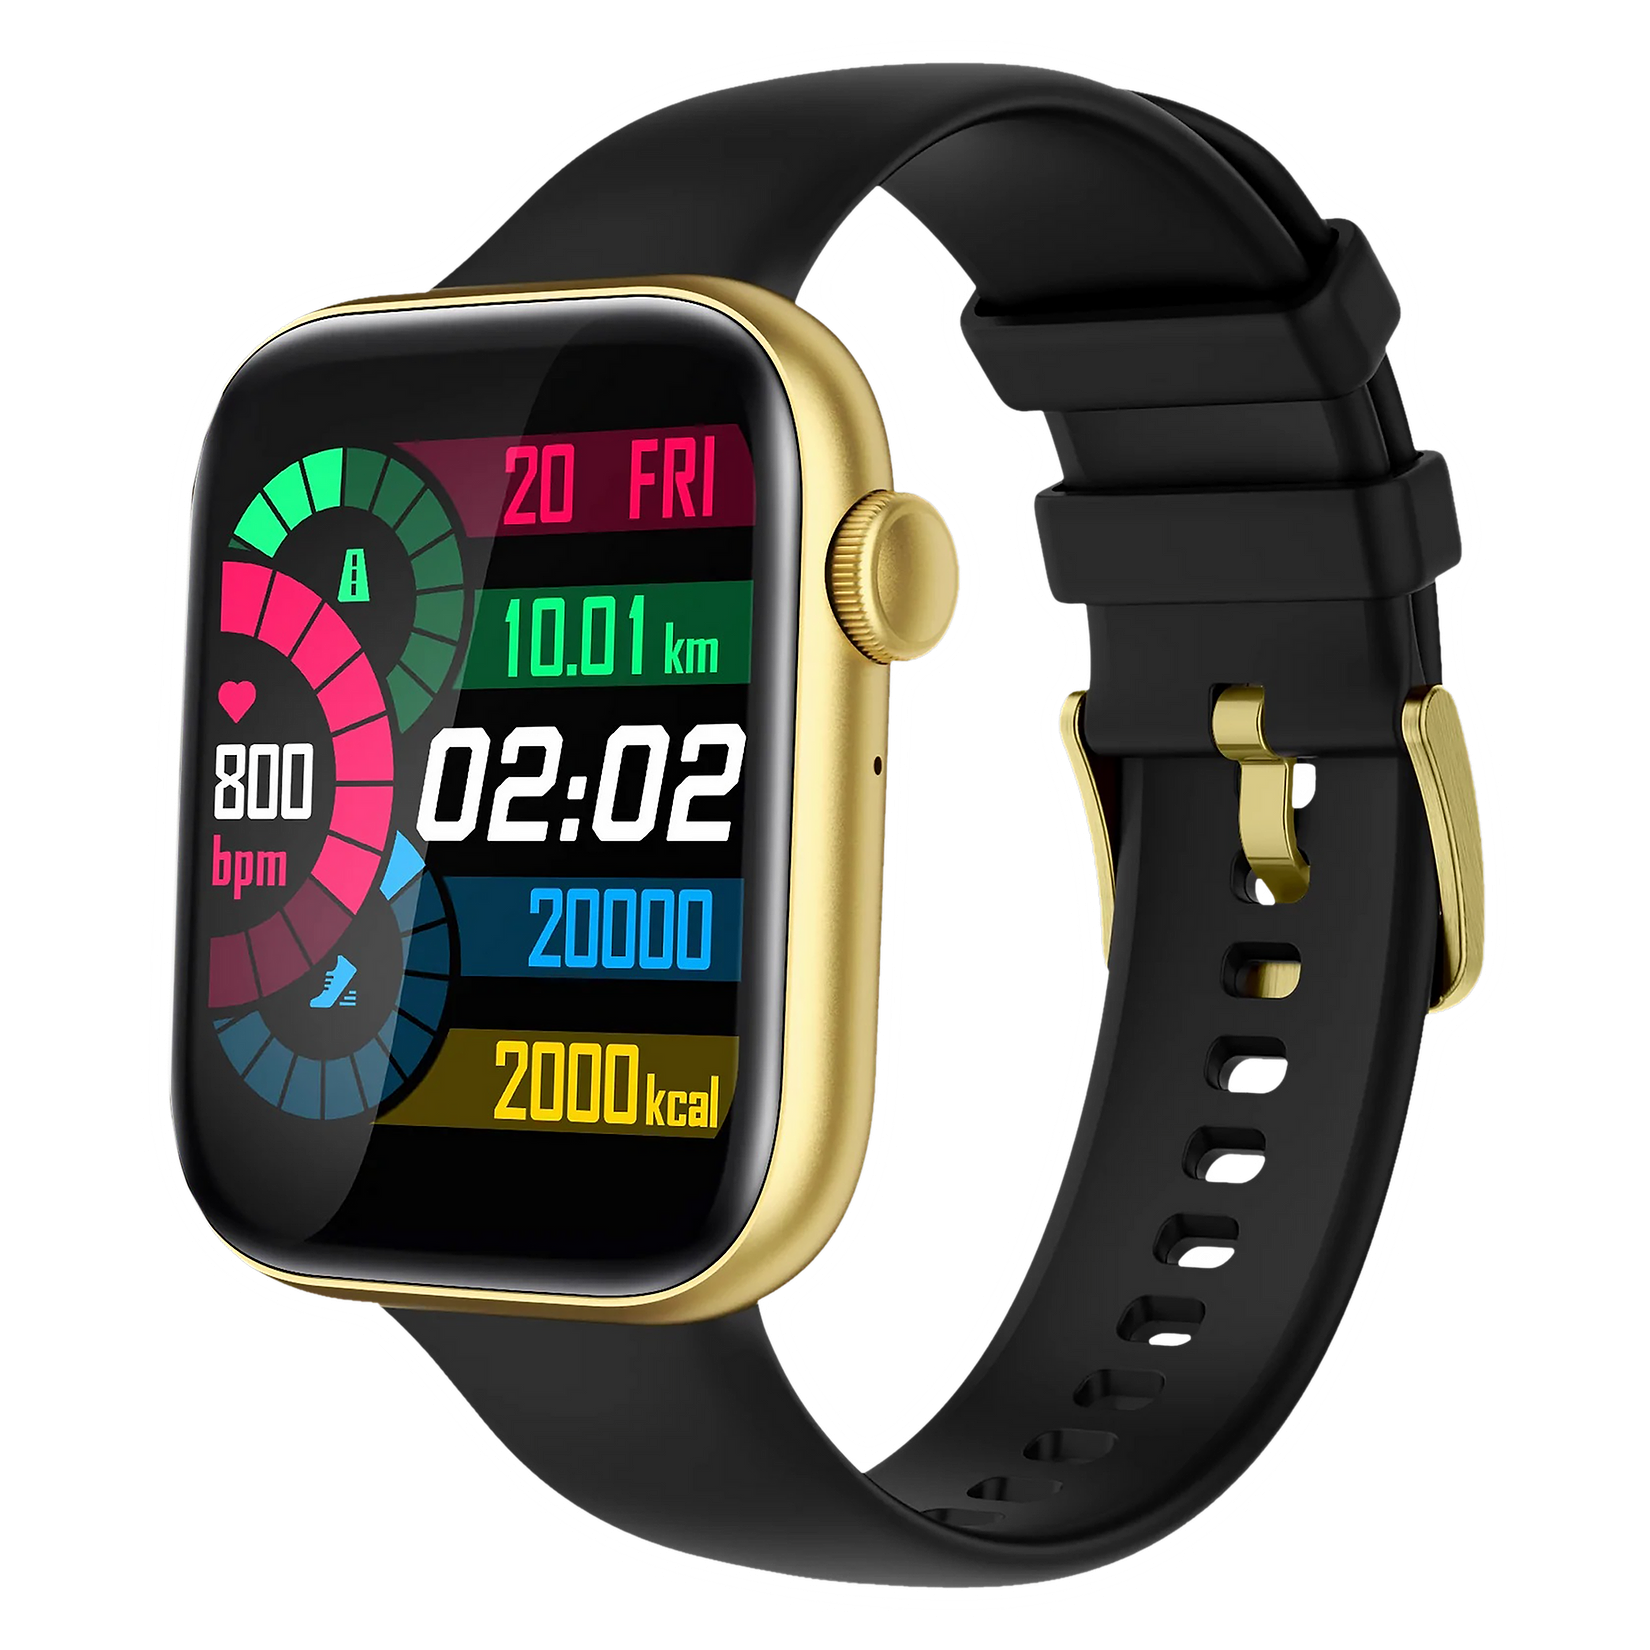 Fire-Boltt Ring 3 Smartwatch with Bluetooth Calling BSW043 GOLD BLACK - Kamal Watch Company